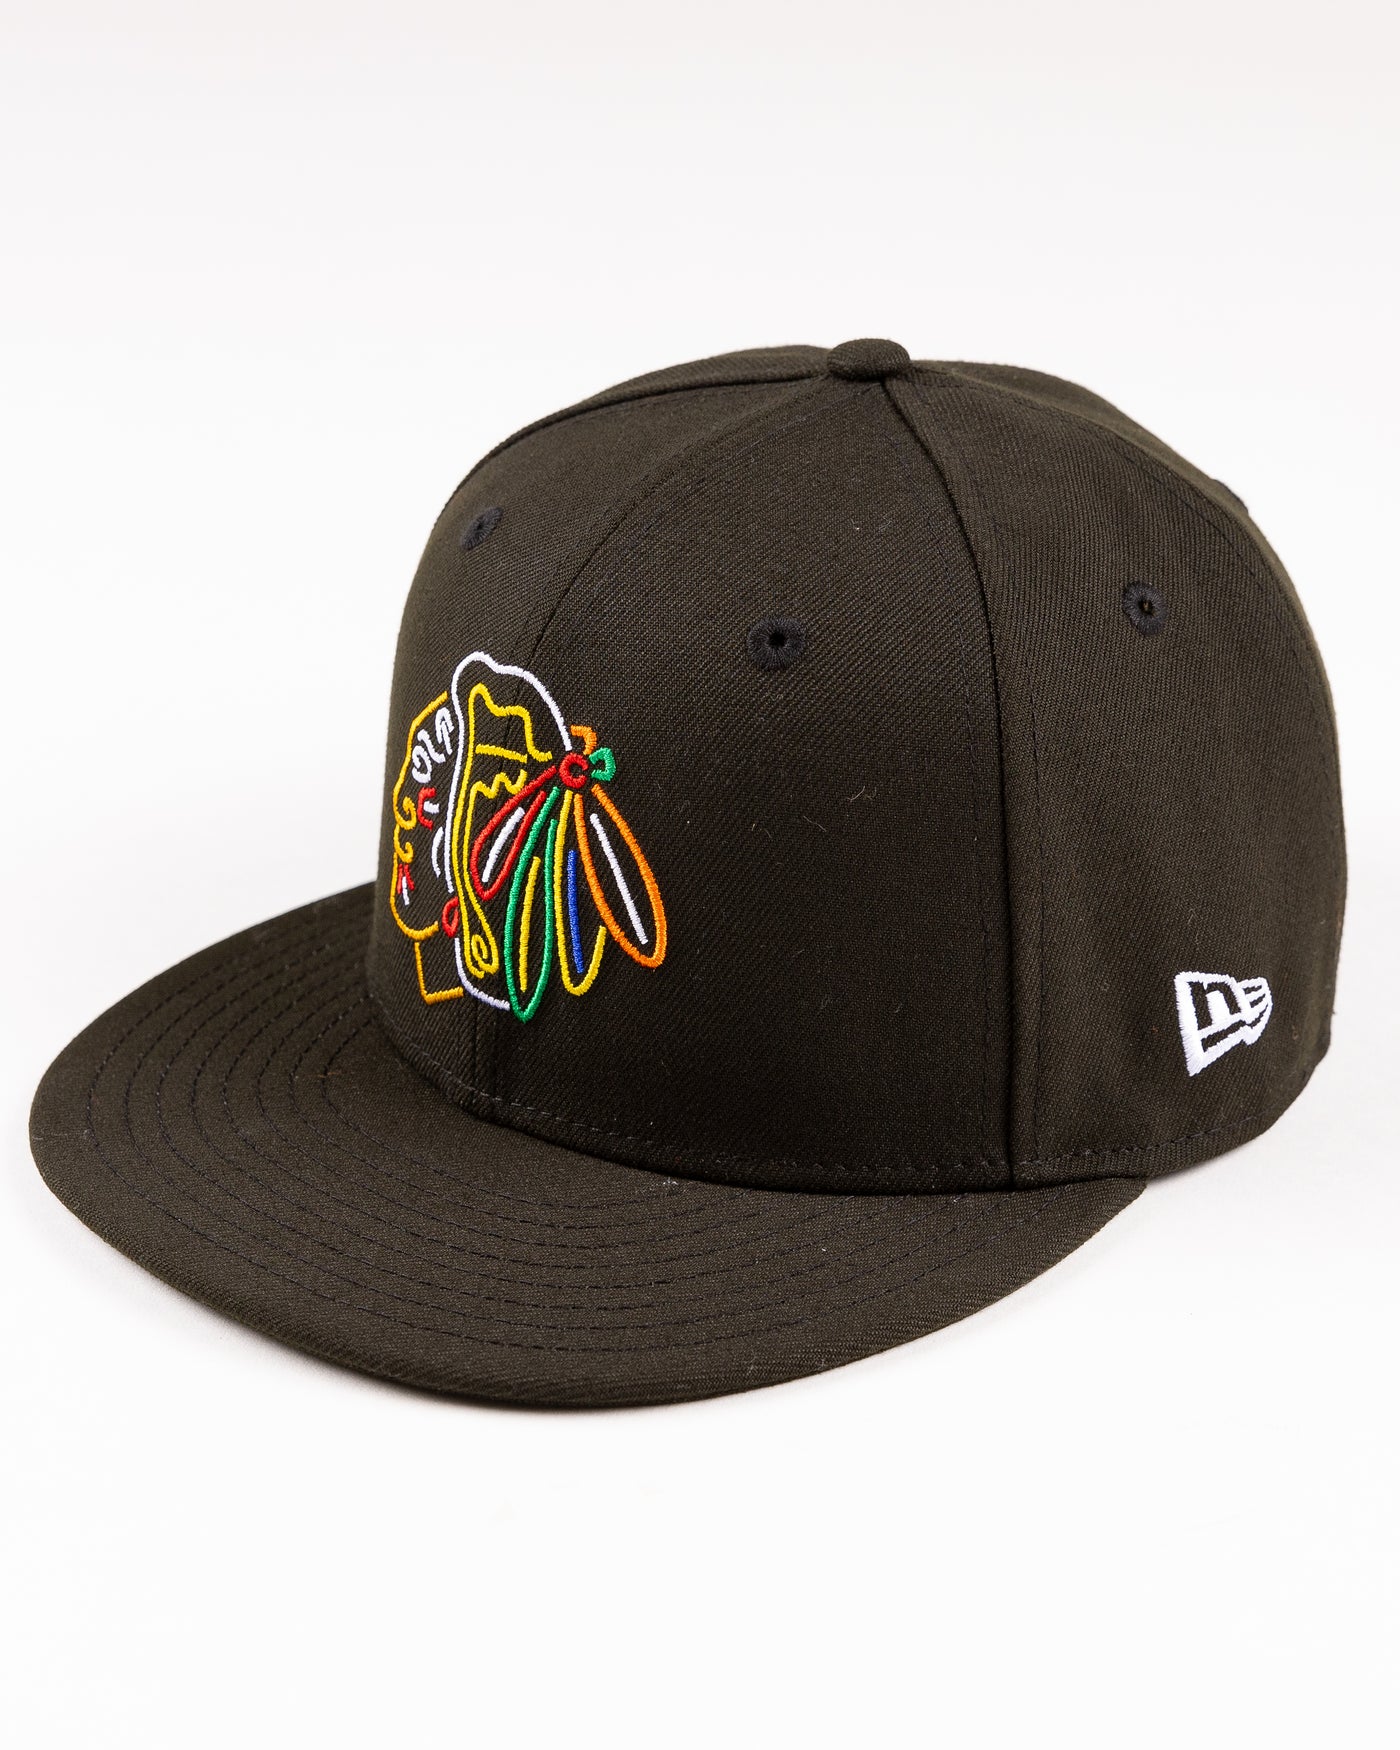 black New Era fitted cap with Chicago Blackhaks primary logo embroidered in front and secondary logo embroidered on back in neon lights colorway - left angle lay flat